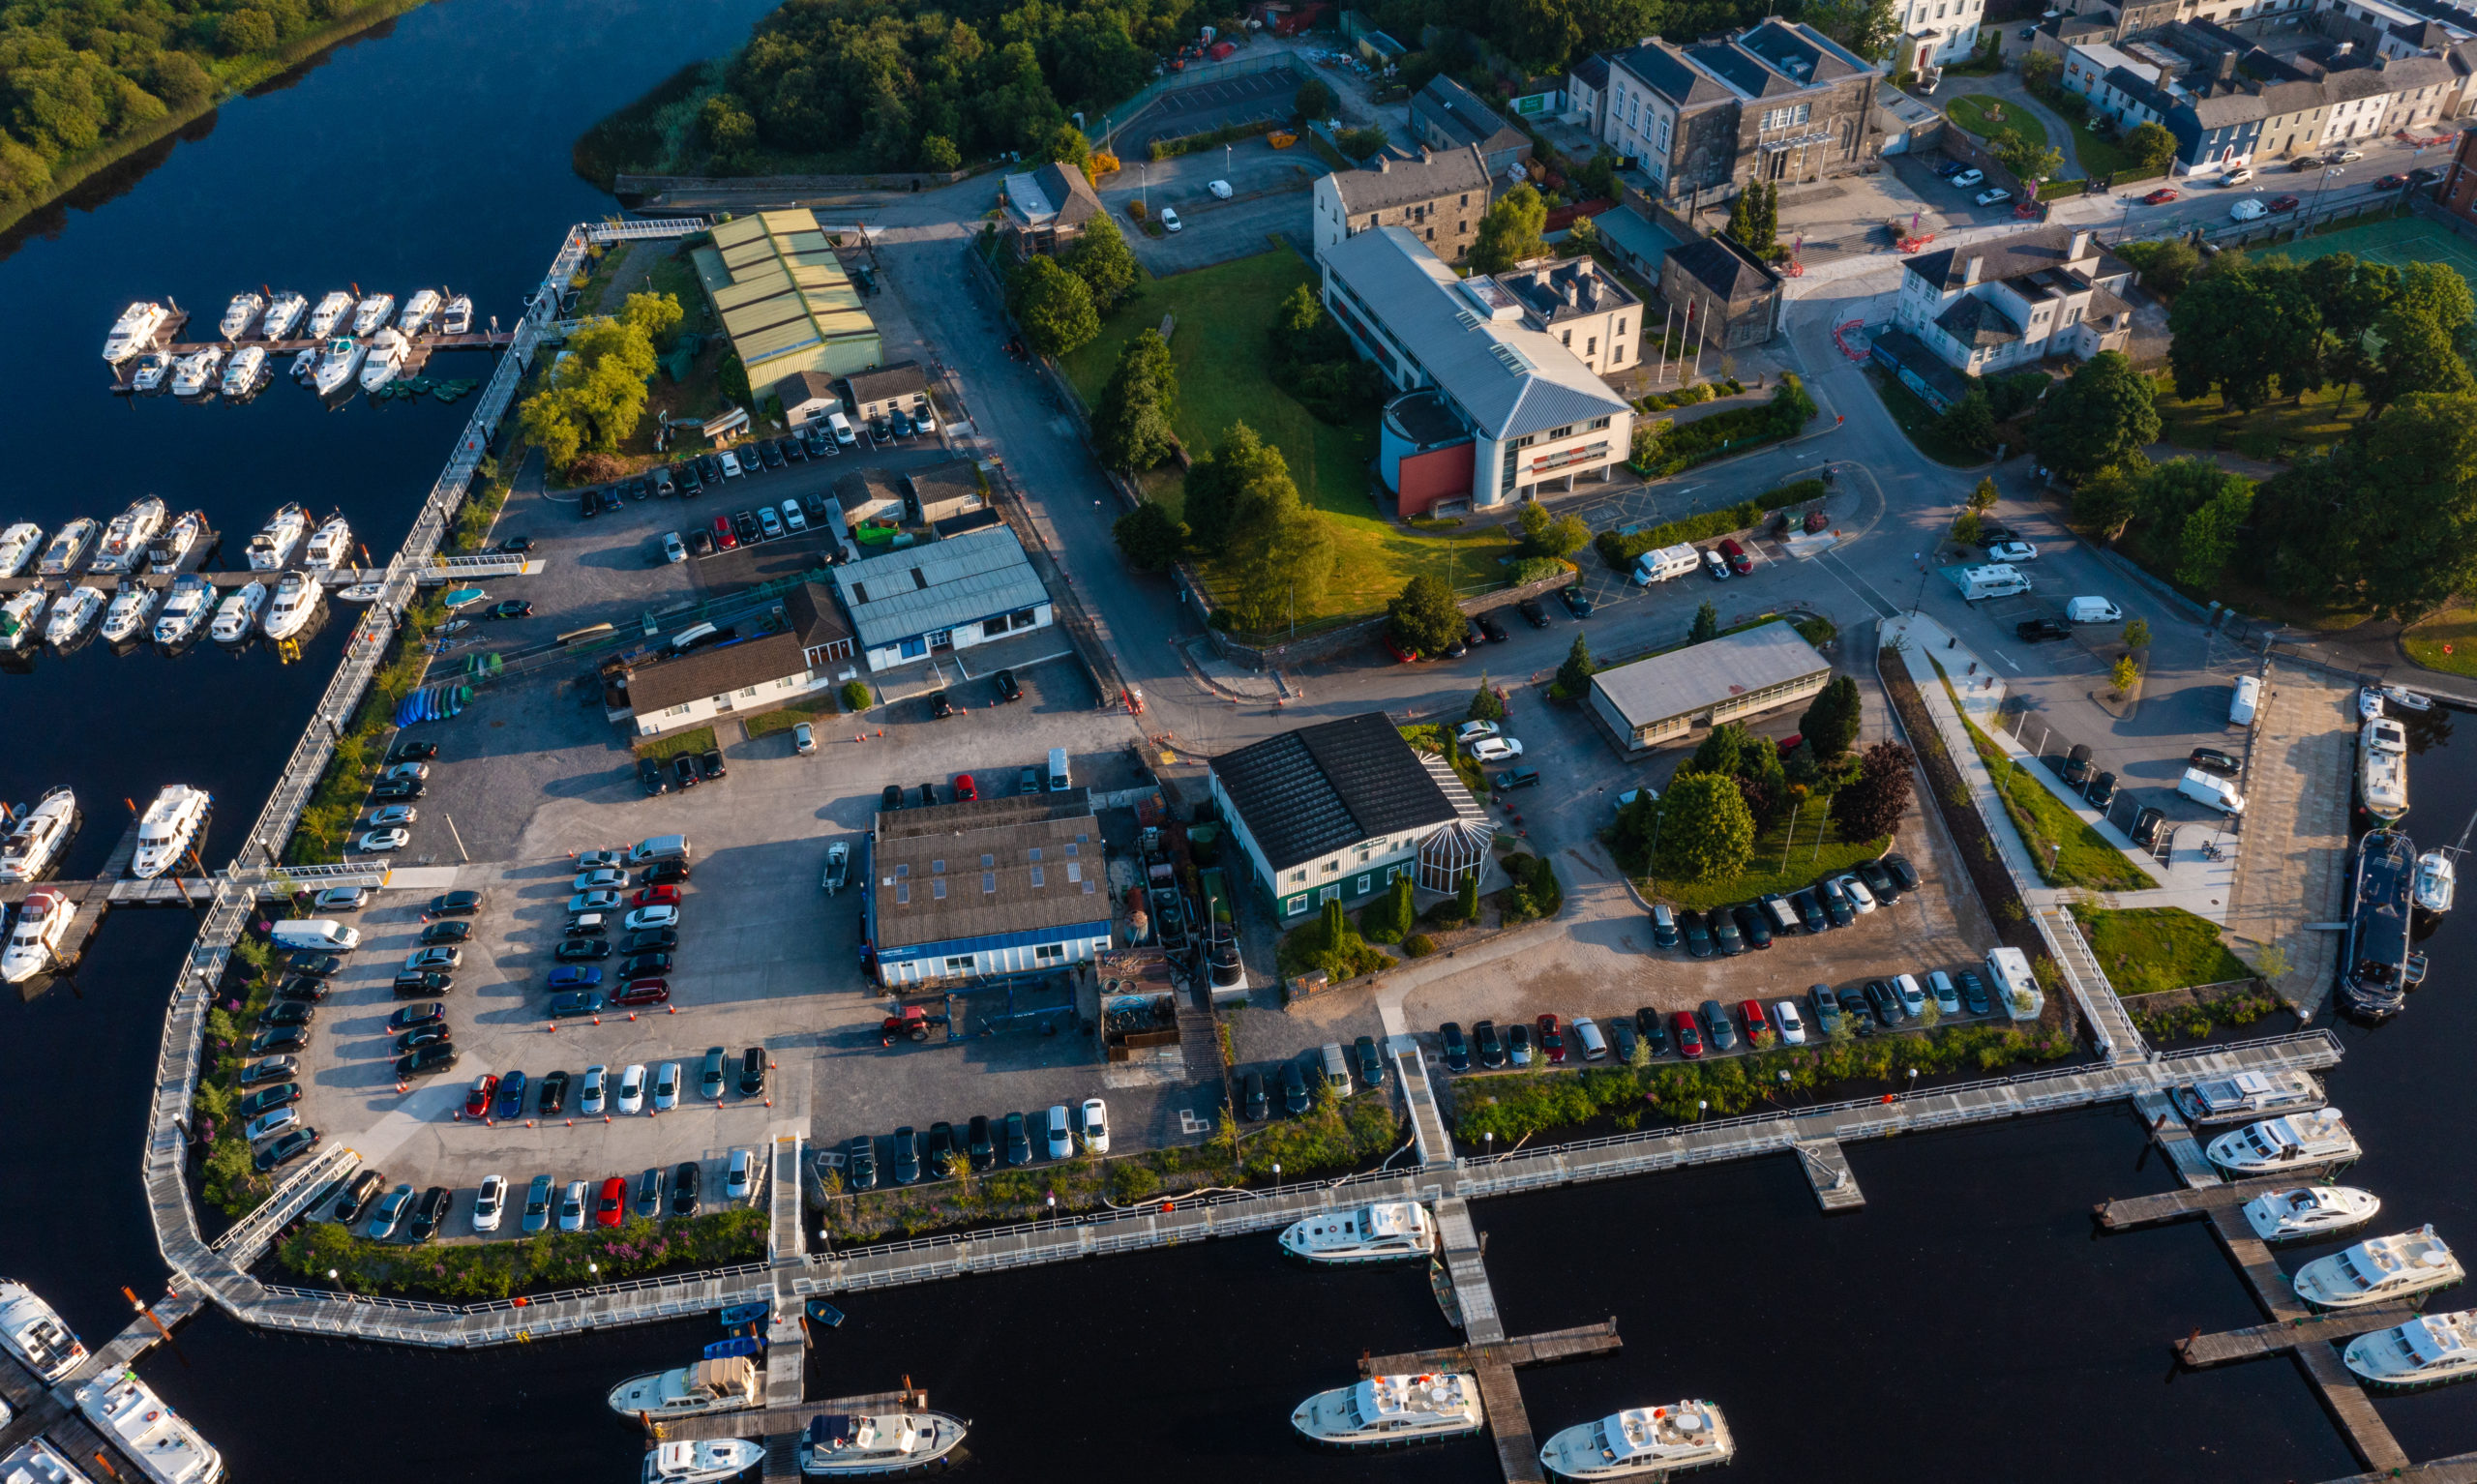 Aerial view of Carrick on Shannon public marina